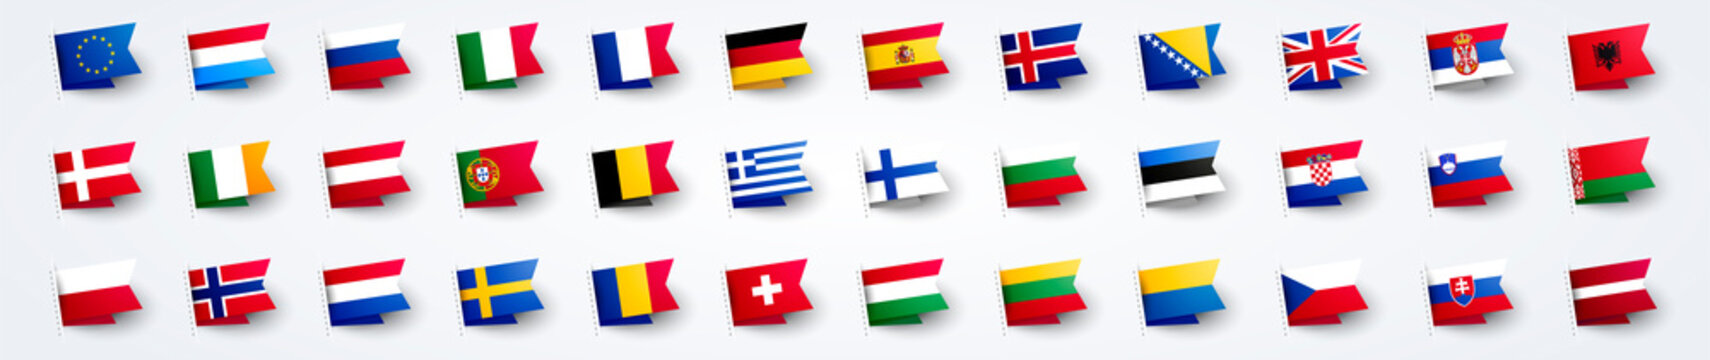 vector illustration giant european flag set with europe country flags.